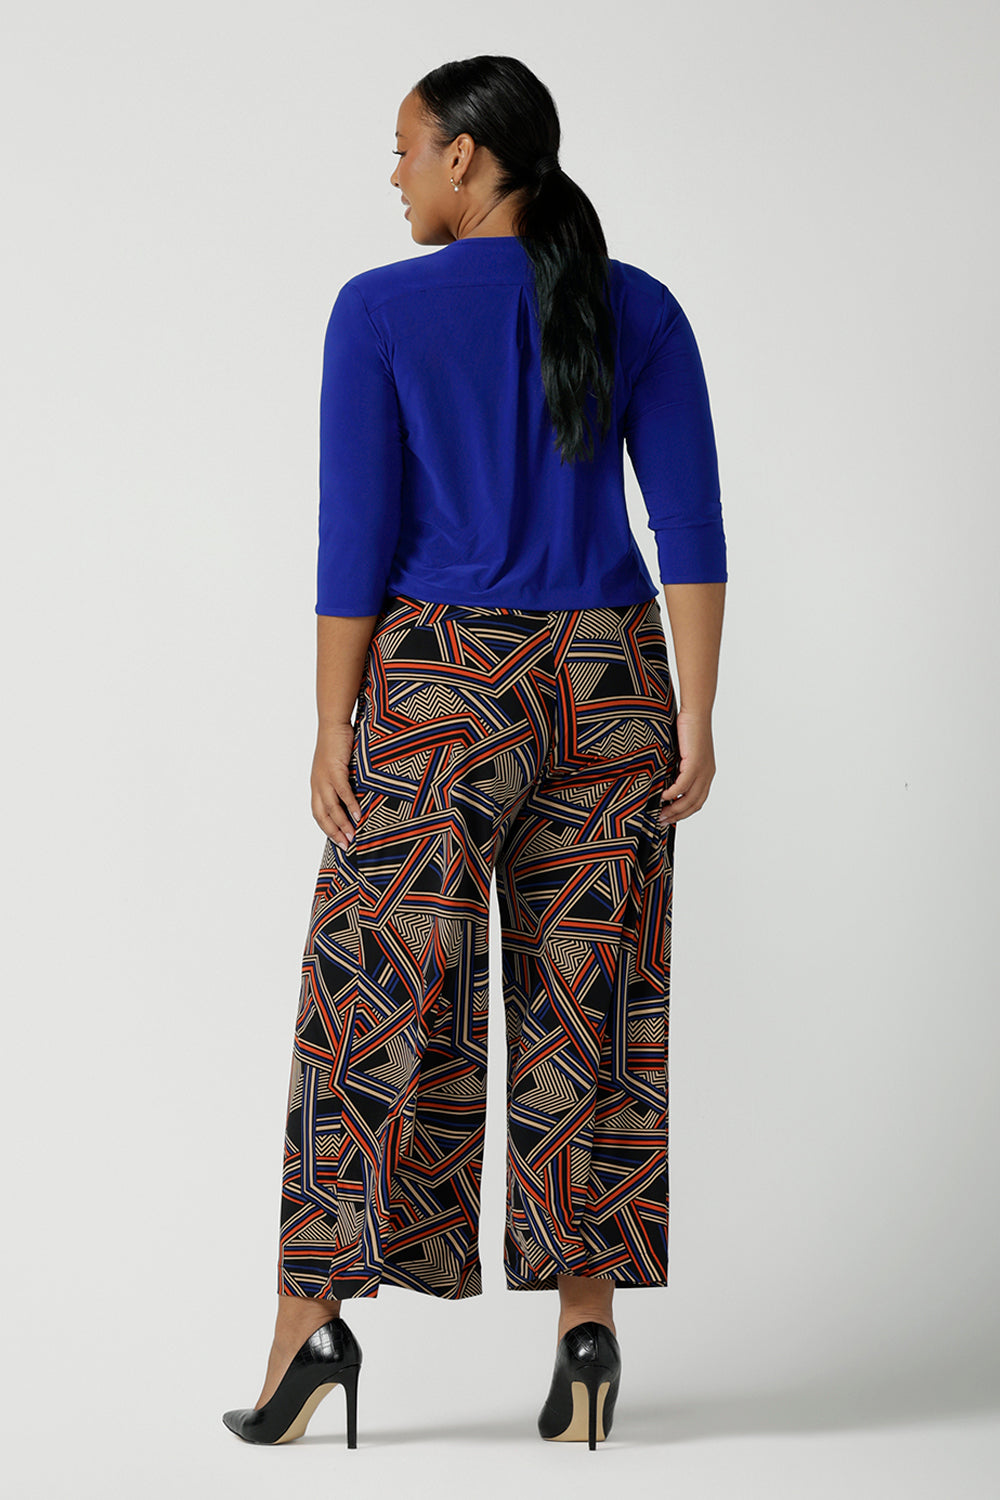 Back view of a size 16 woman wears the Dany Culotte in Trixie, a printed Jersey work pant with a geometric pattern. Wide leg with functional pockets and wide waistband. Cropped length and petite height friendly. Made in Australia for women size 8 - 24.